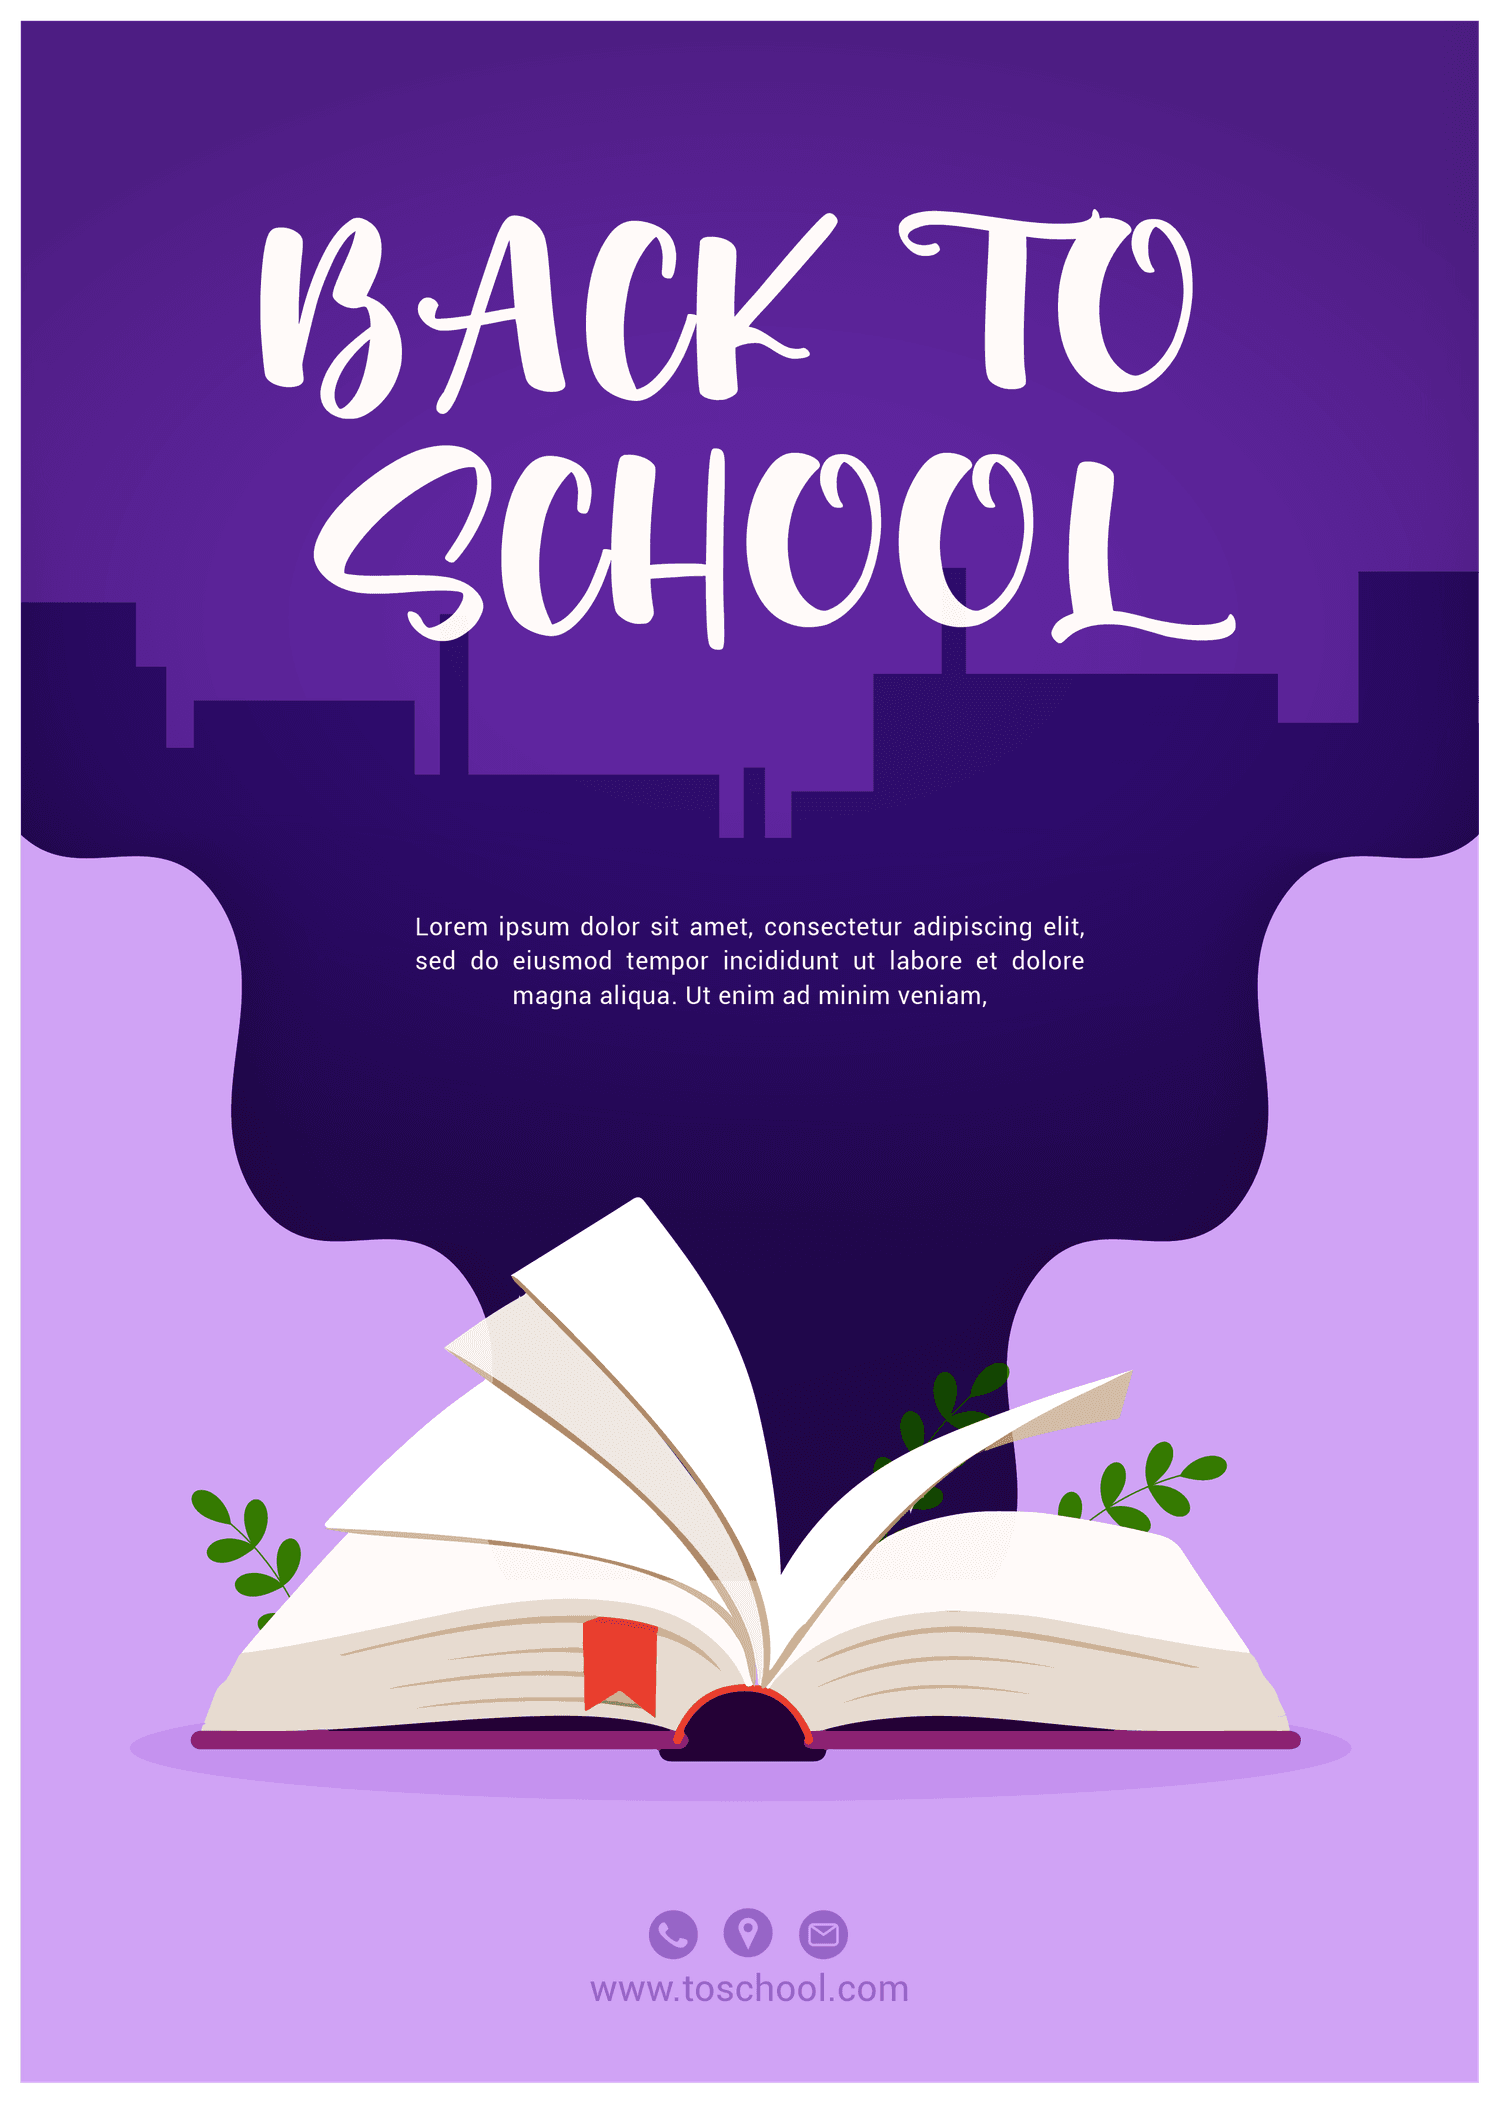 back to school fun poster template with vibrant color scheme and kid-friendly illustrations